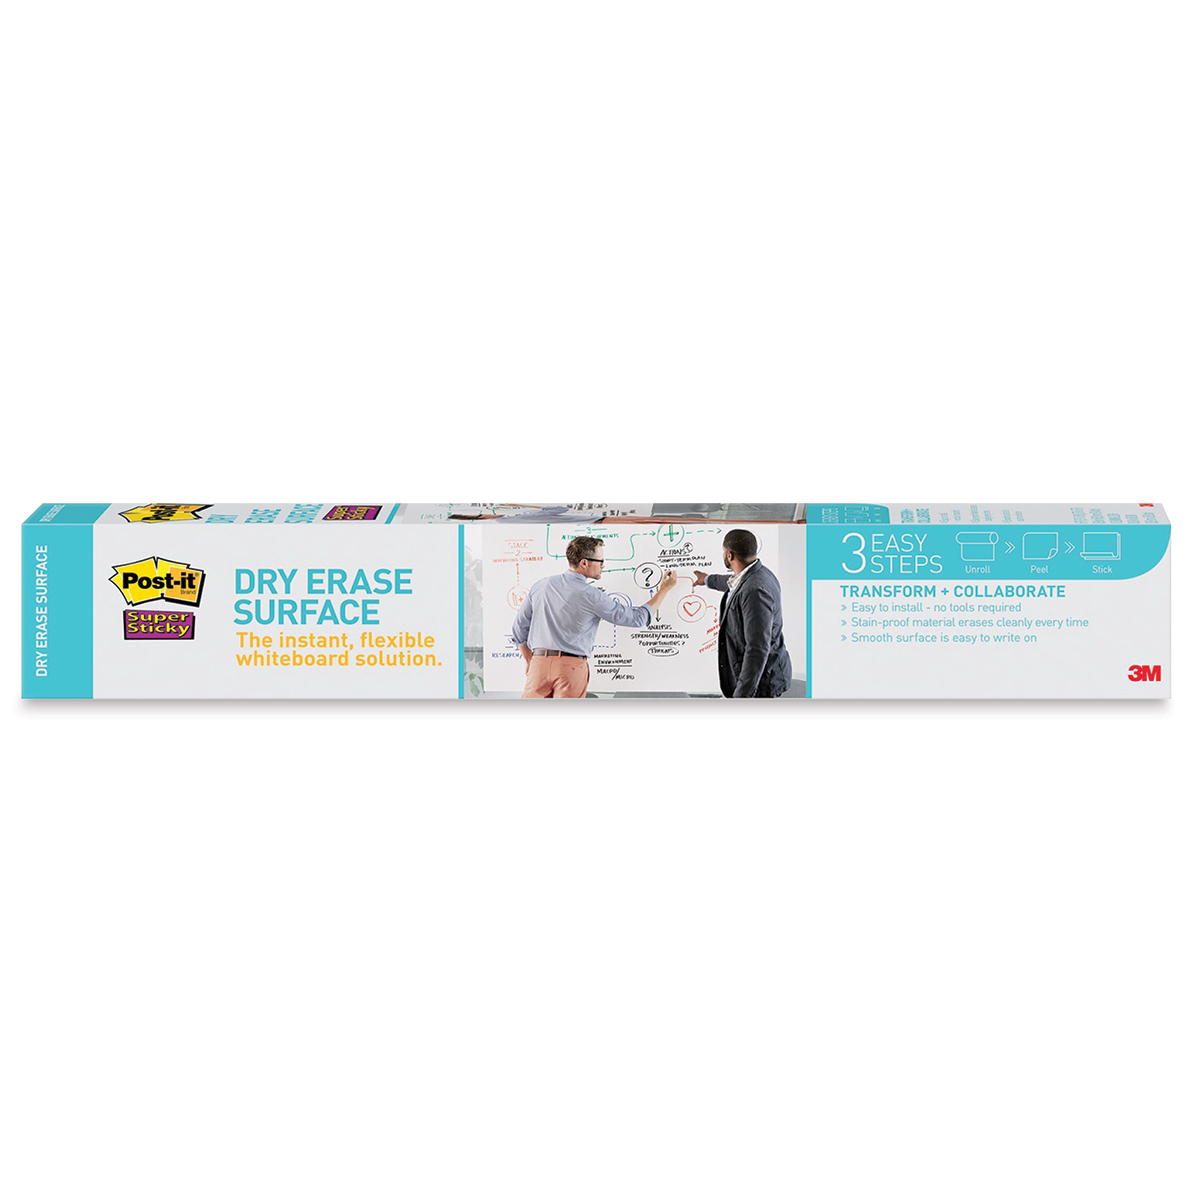 Post-it Super Sticky Dry Erase Surface - Roll, 2 ft x 3 ft